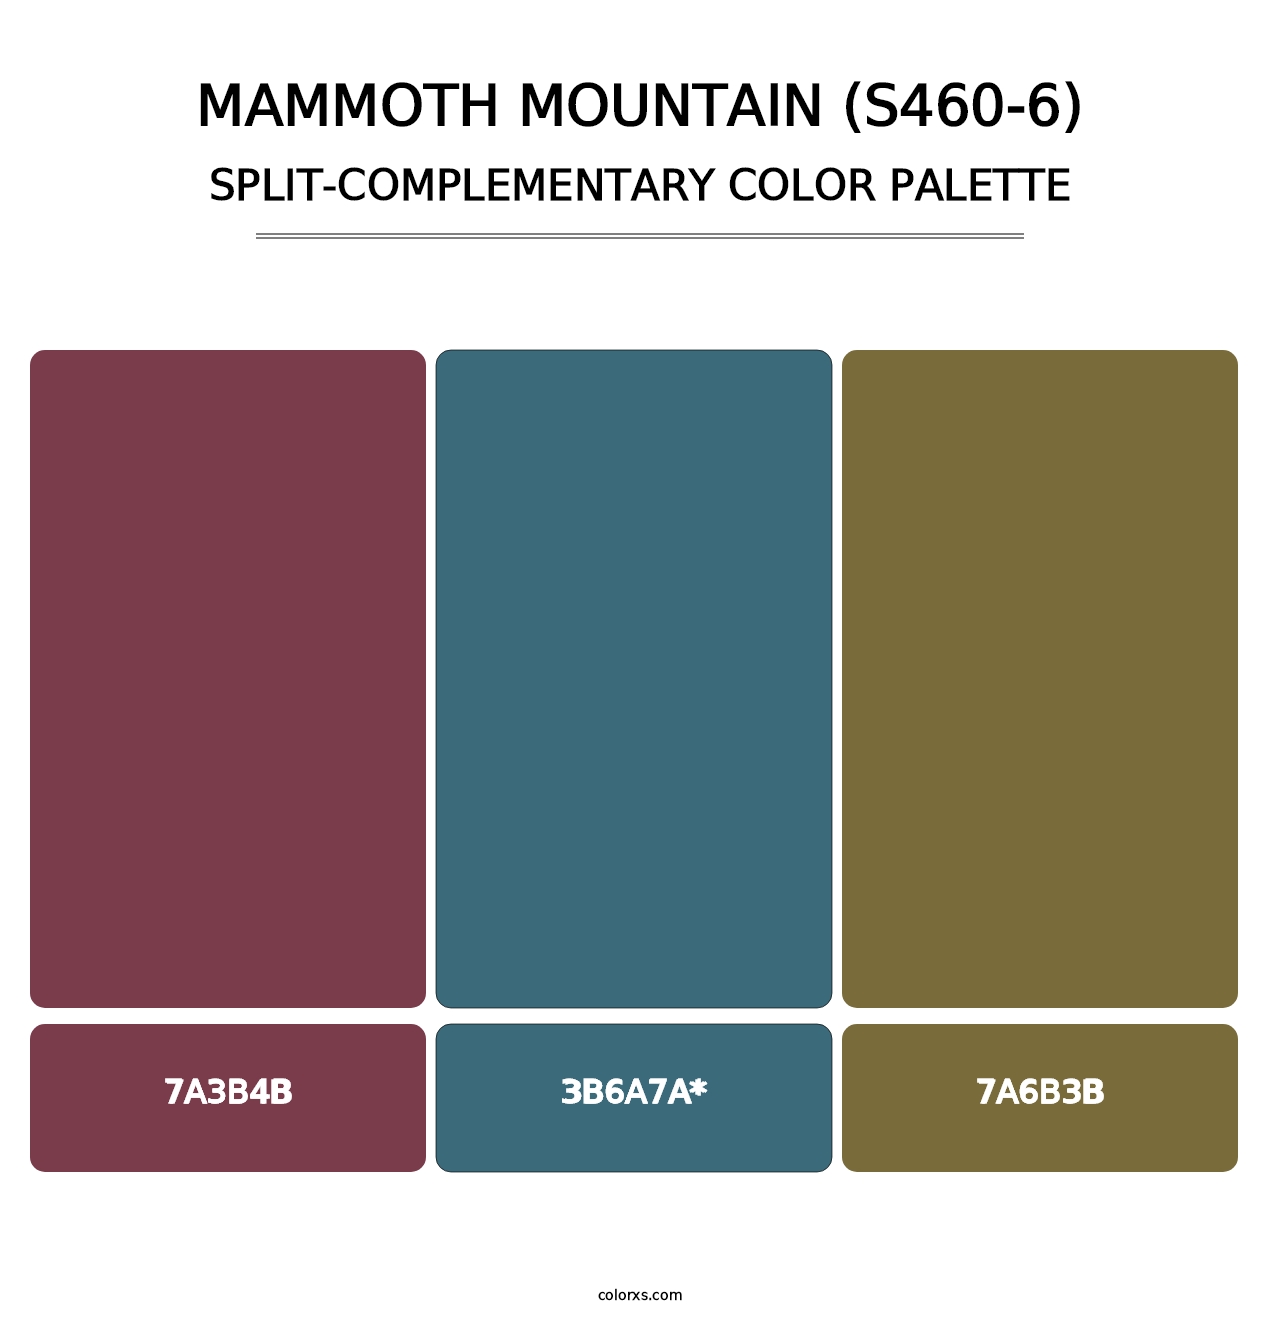 Mammoth Mountain (S460-6) - Split-Complementary Color Palette